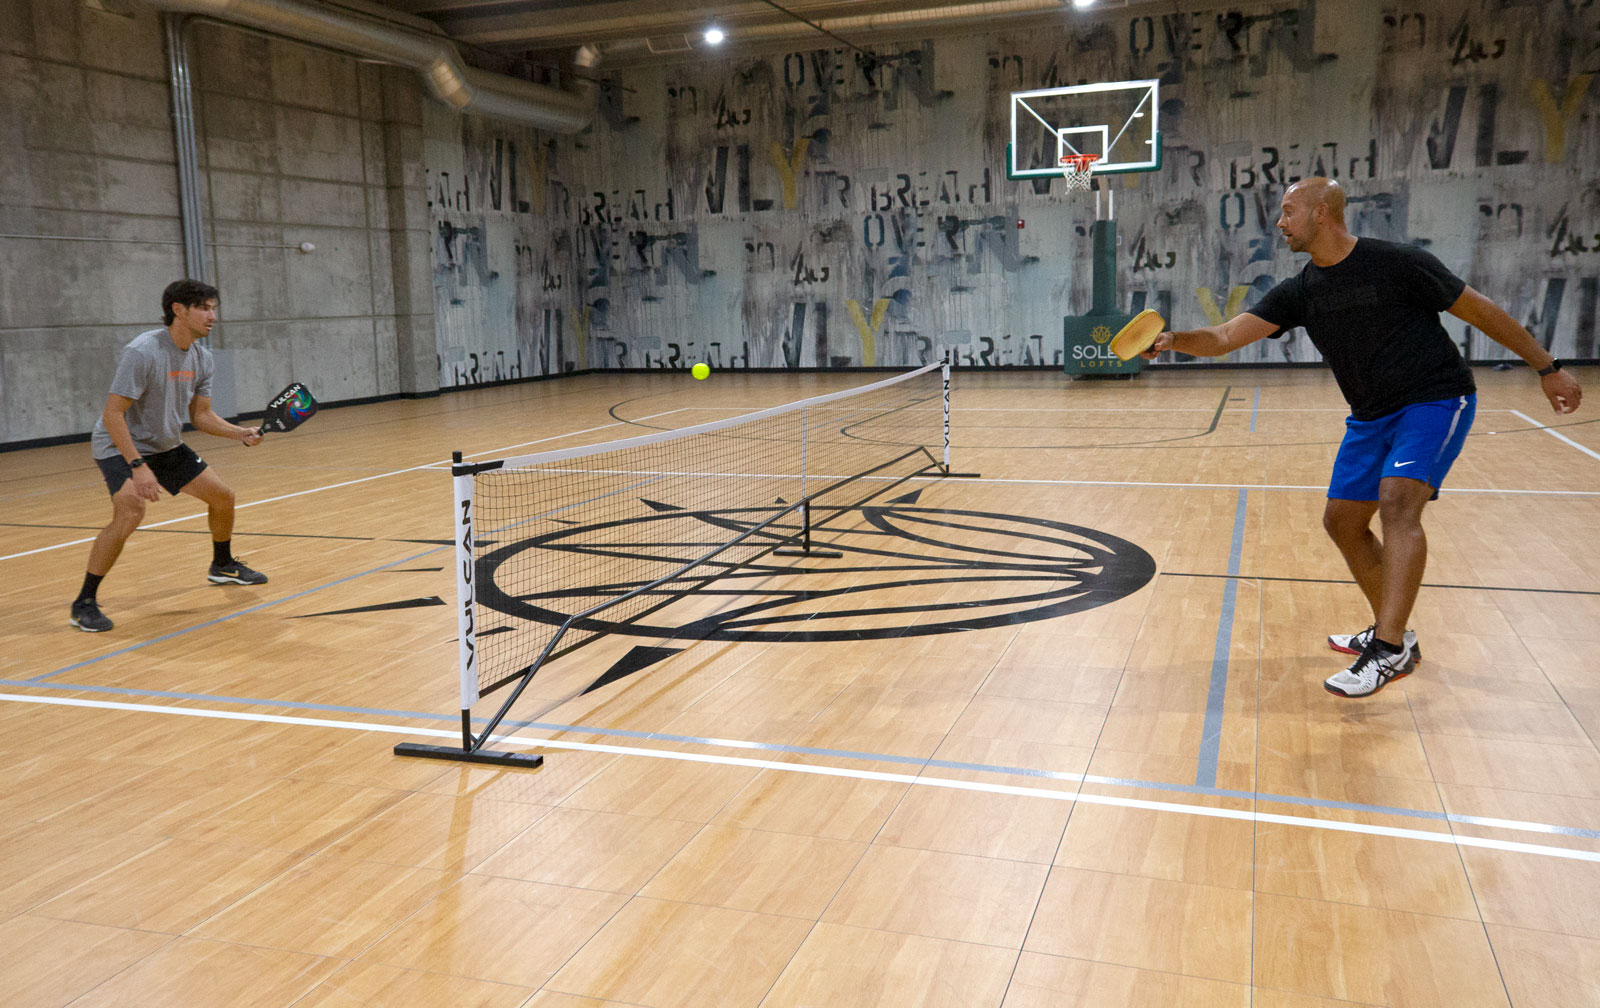 Using the Pickleball lines for a game.